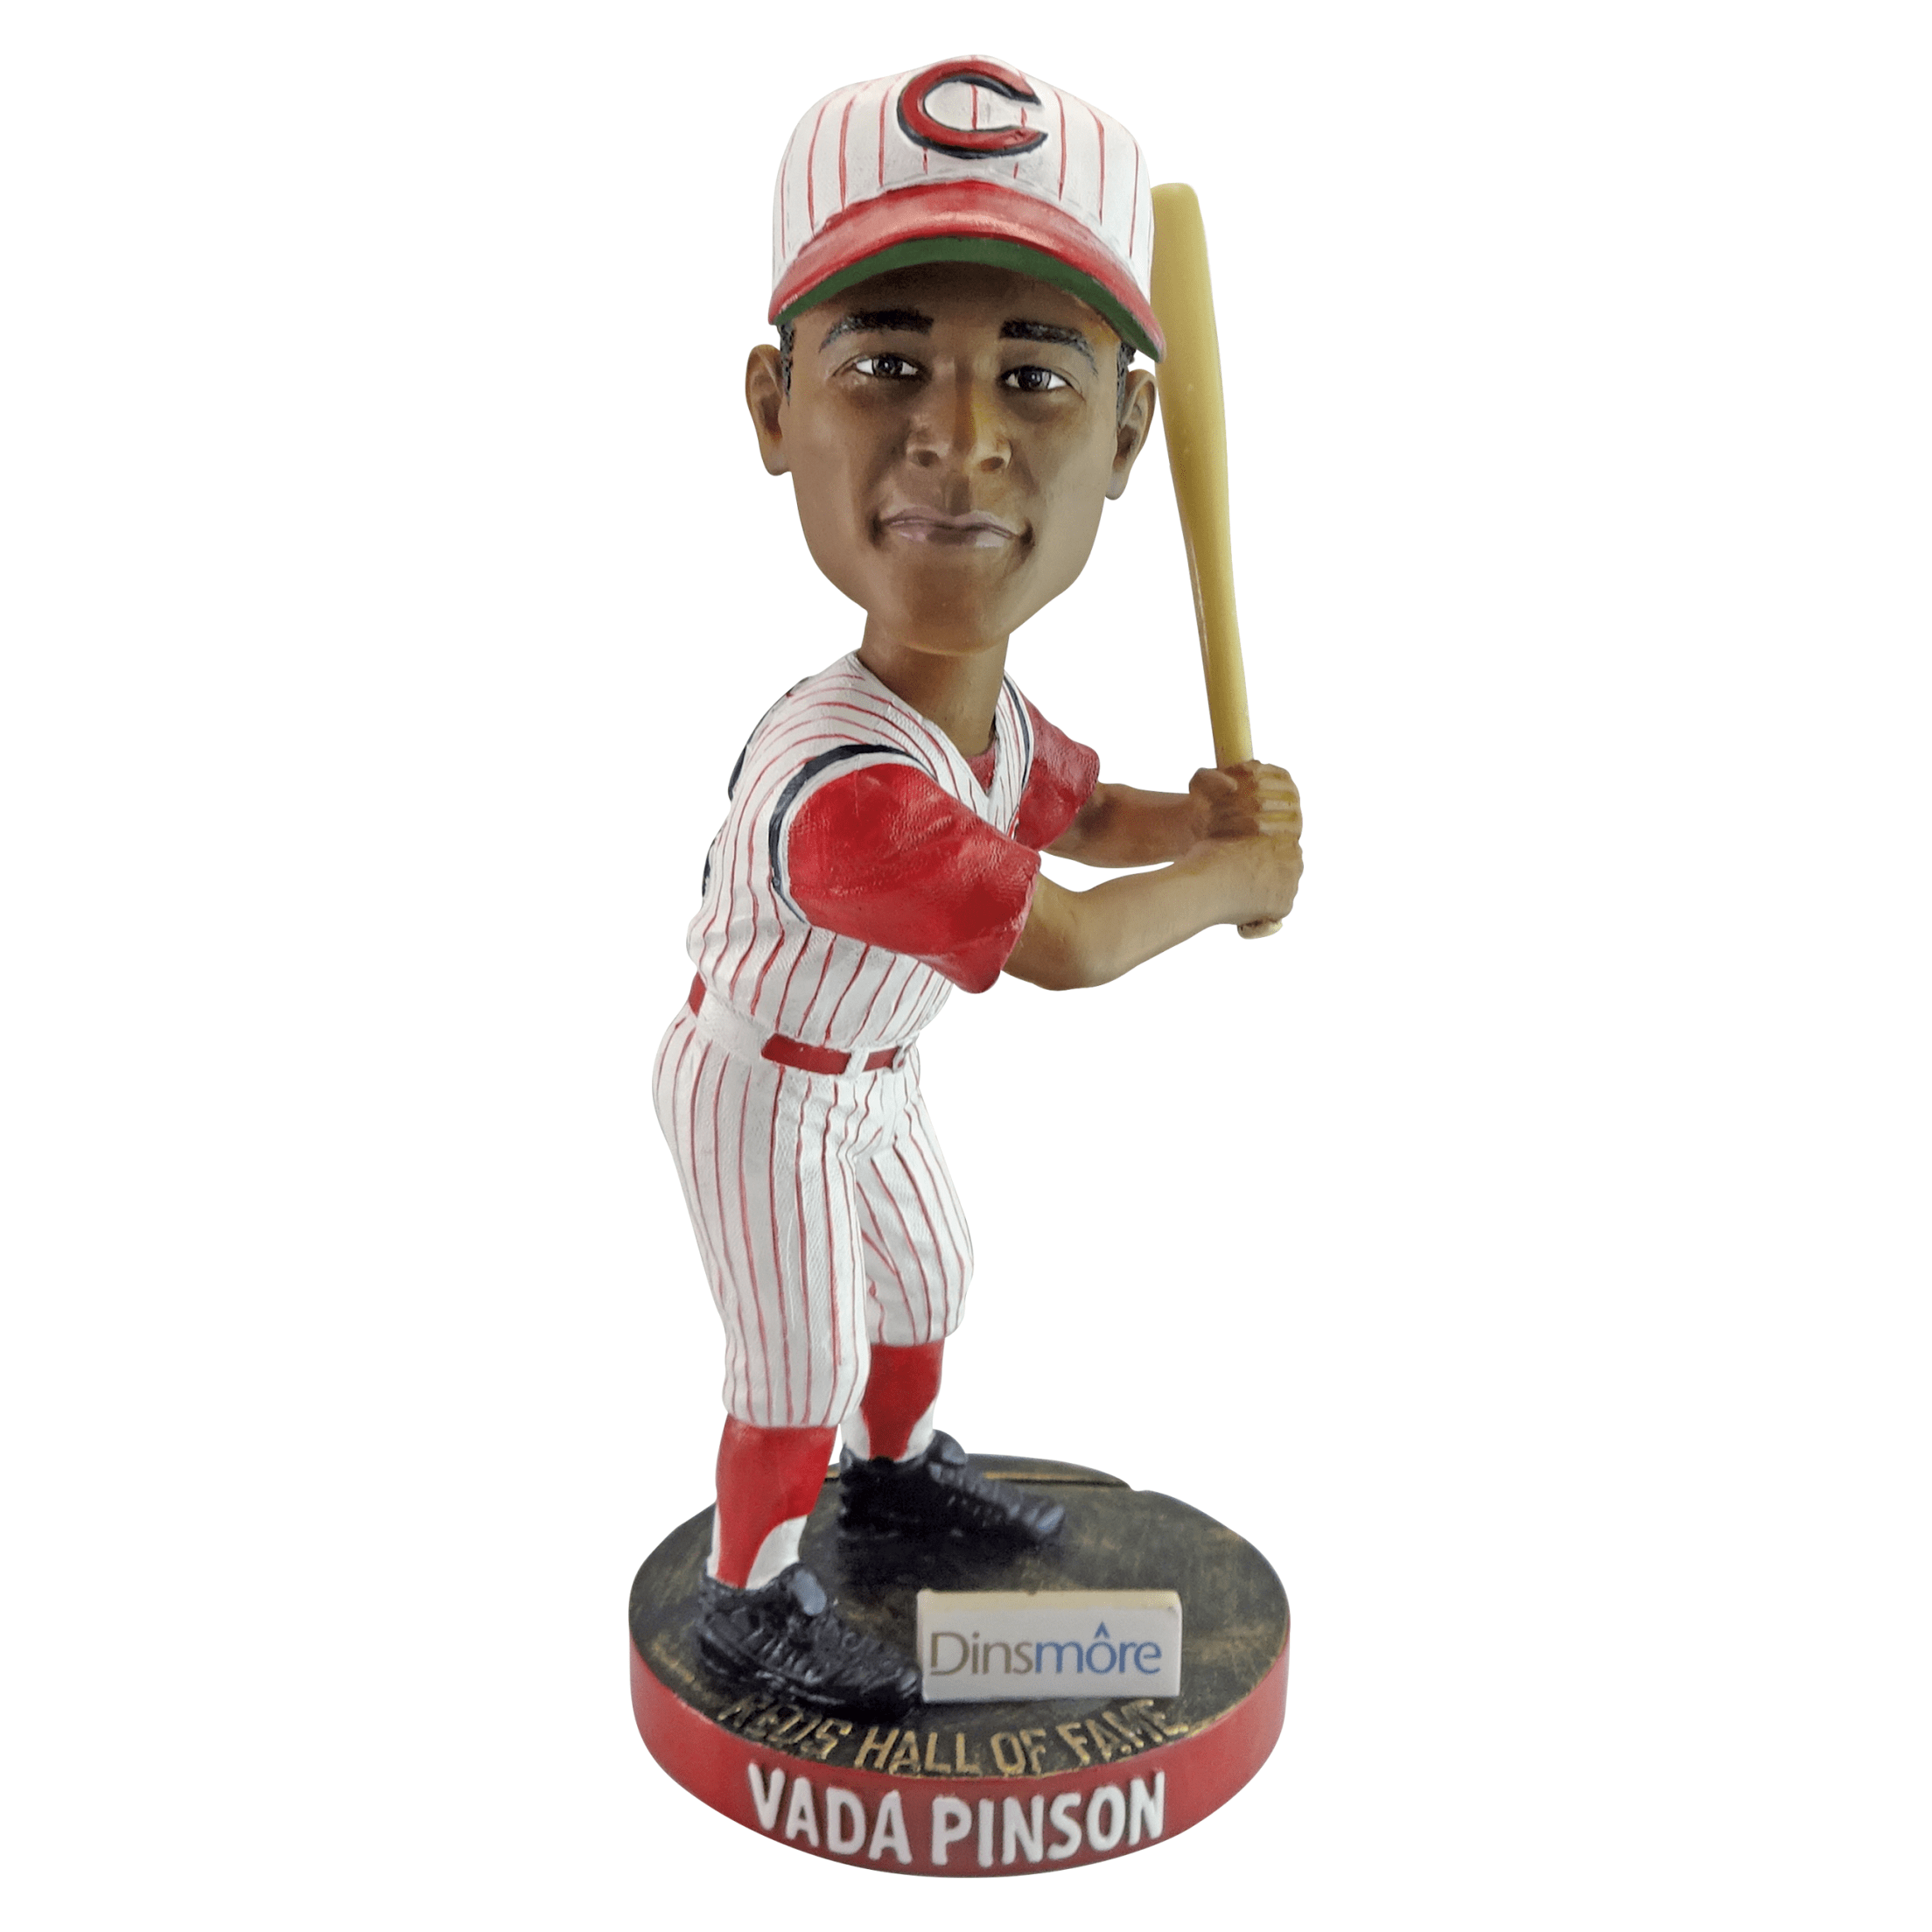 2019 Reds HOF collectible bobblehead for September: Ted Kluszewski